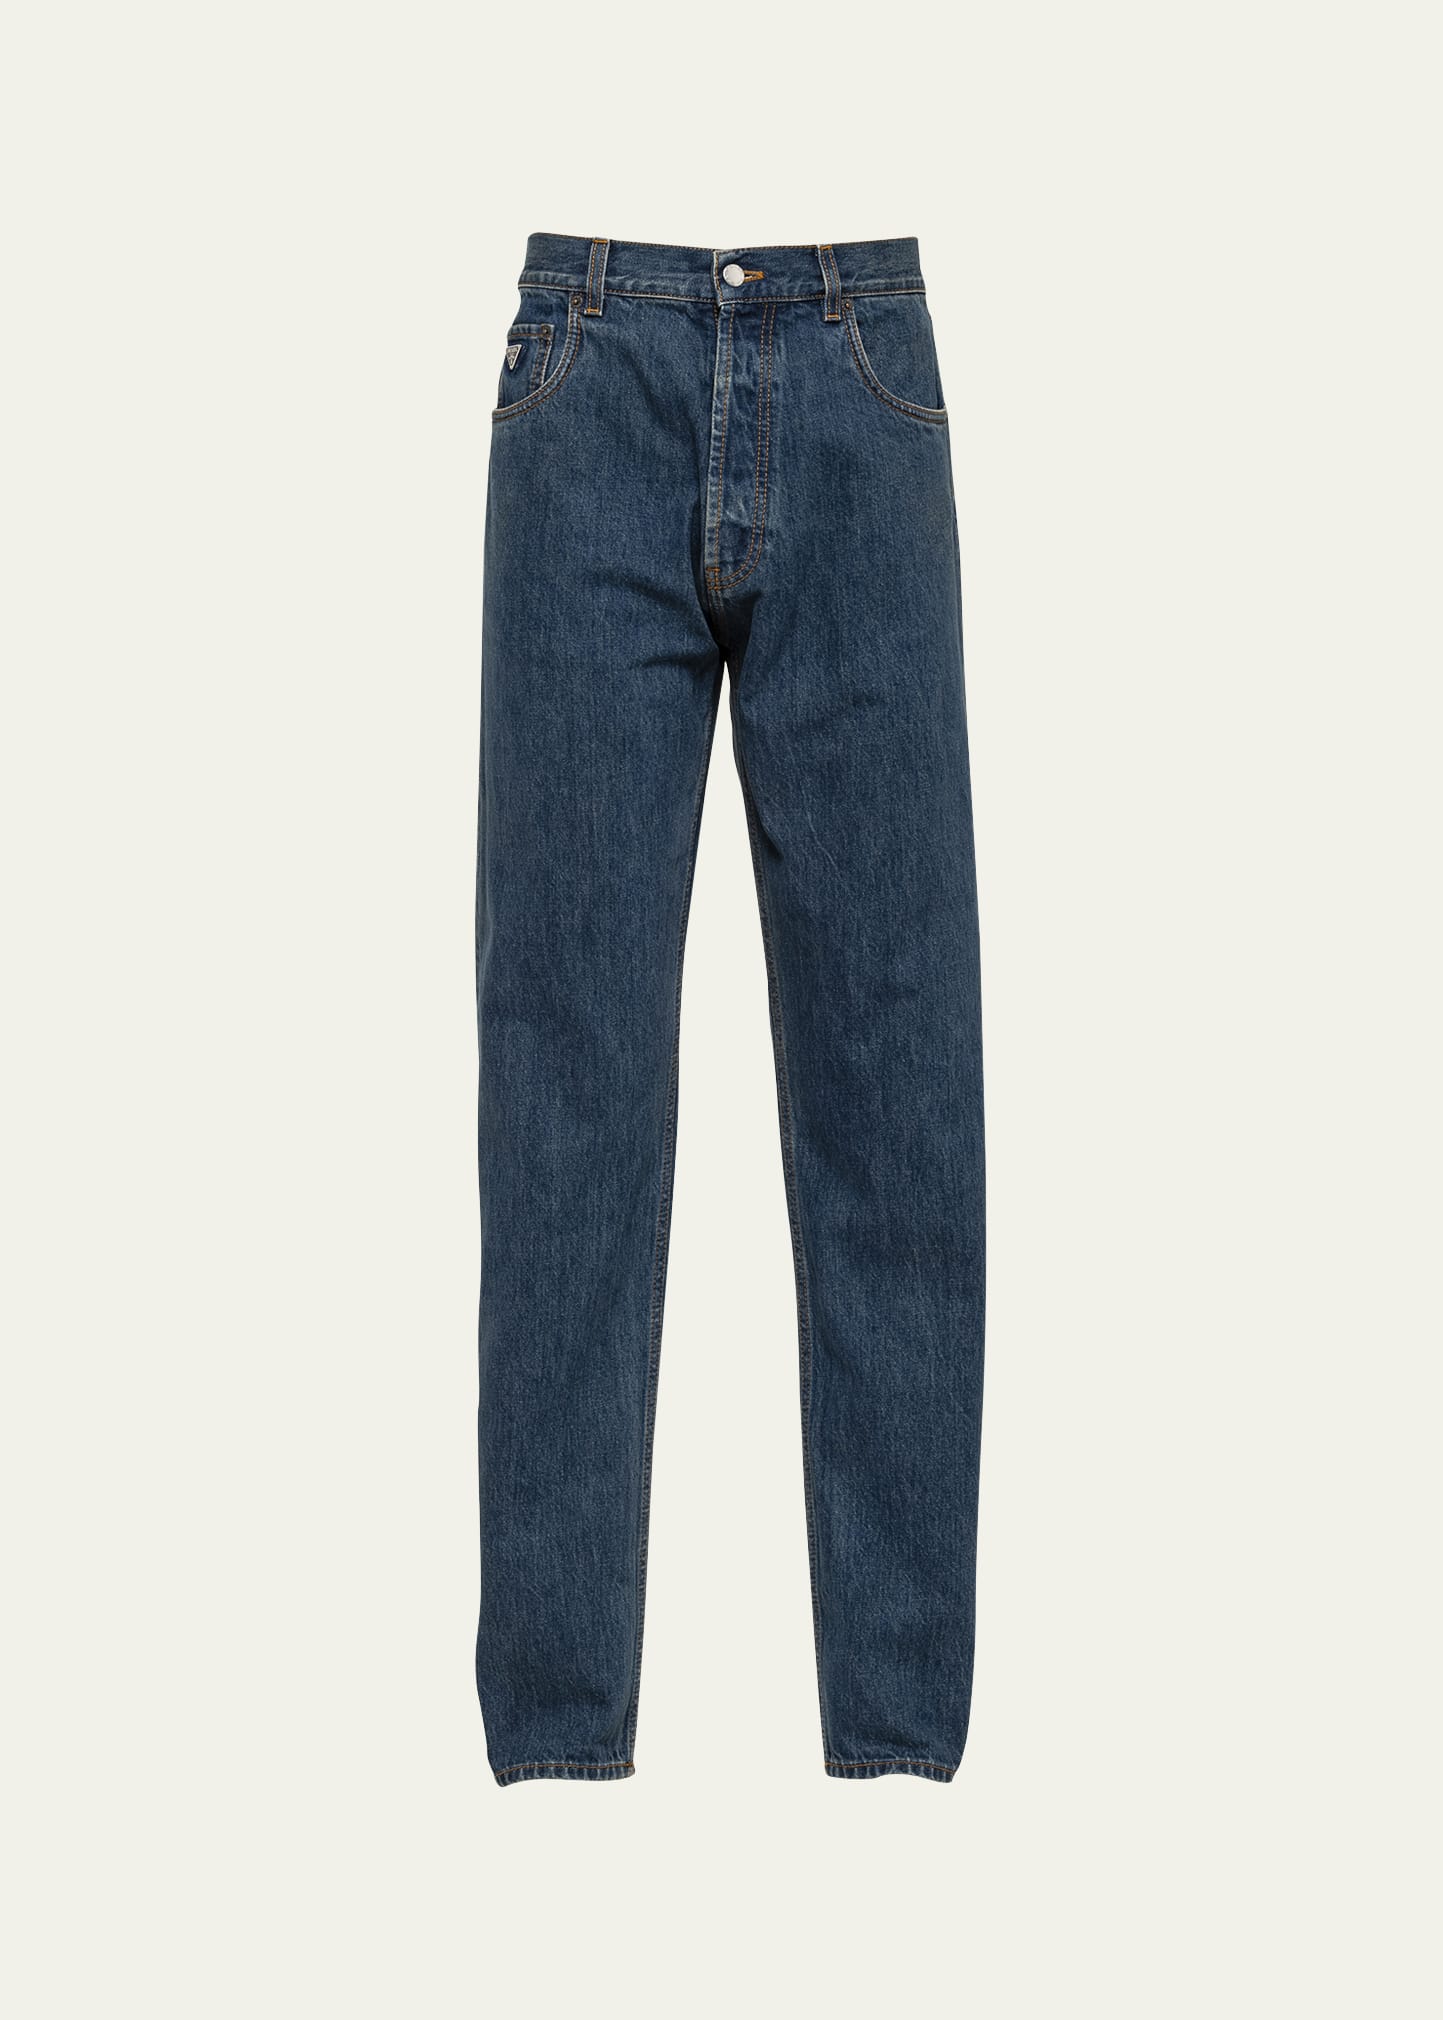 Men's Relaxed-Fit Washed Denim Jean